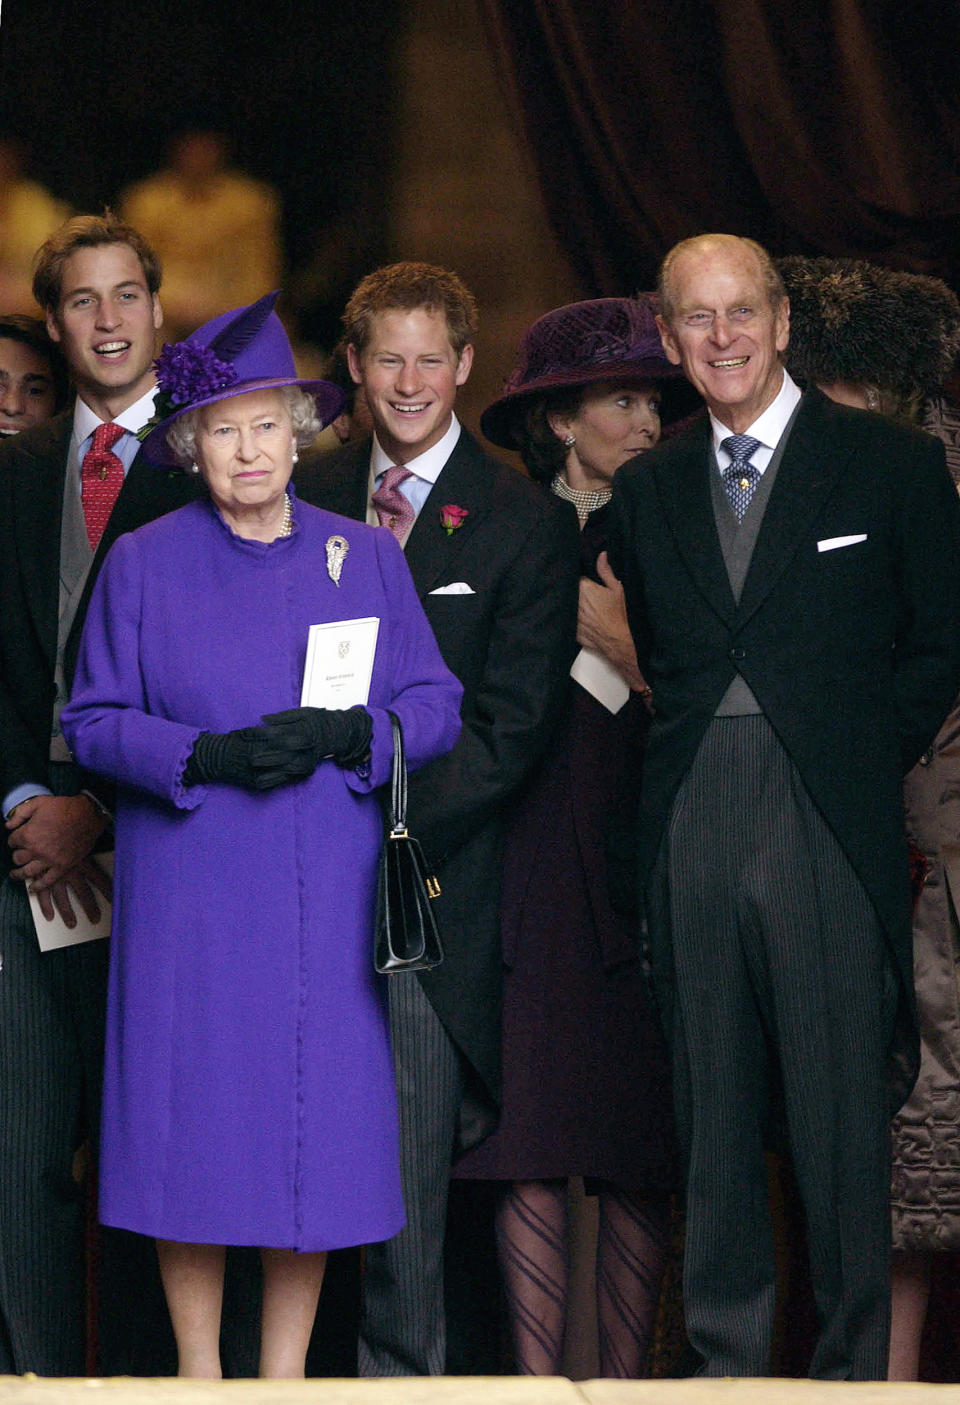 Queen Philip William And Harry At Wedding (Tim Graham Photo Library via Getty Images)